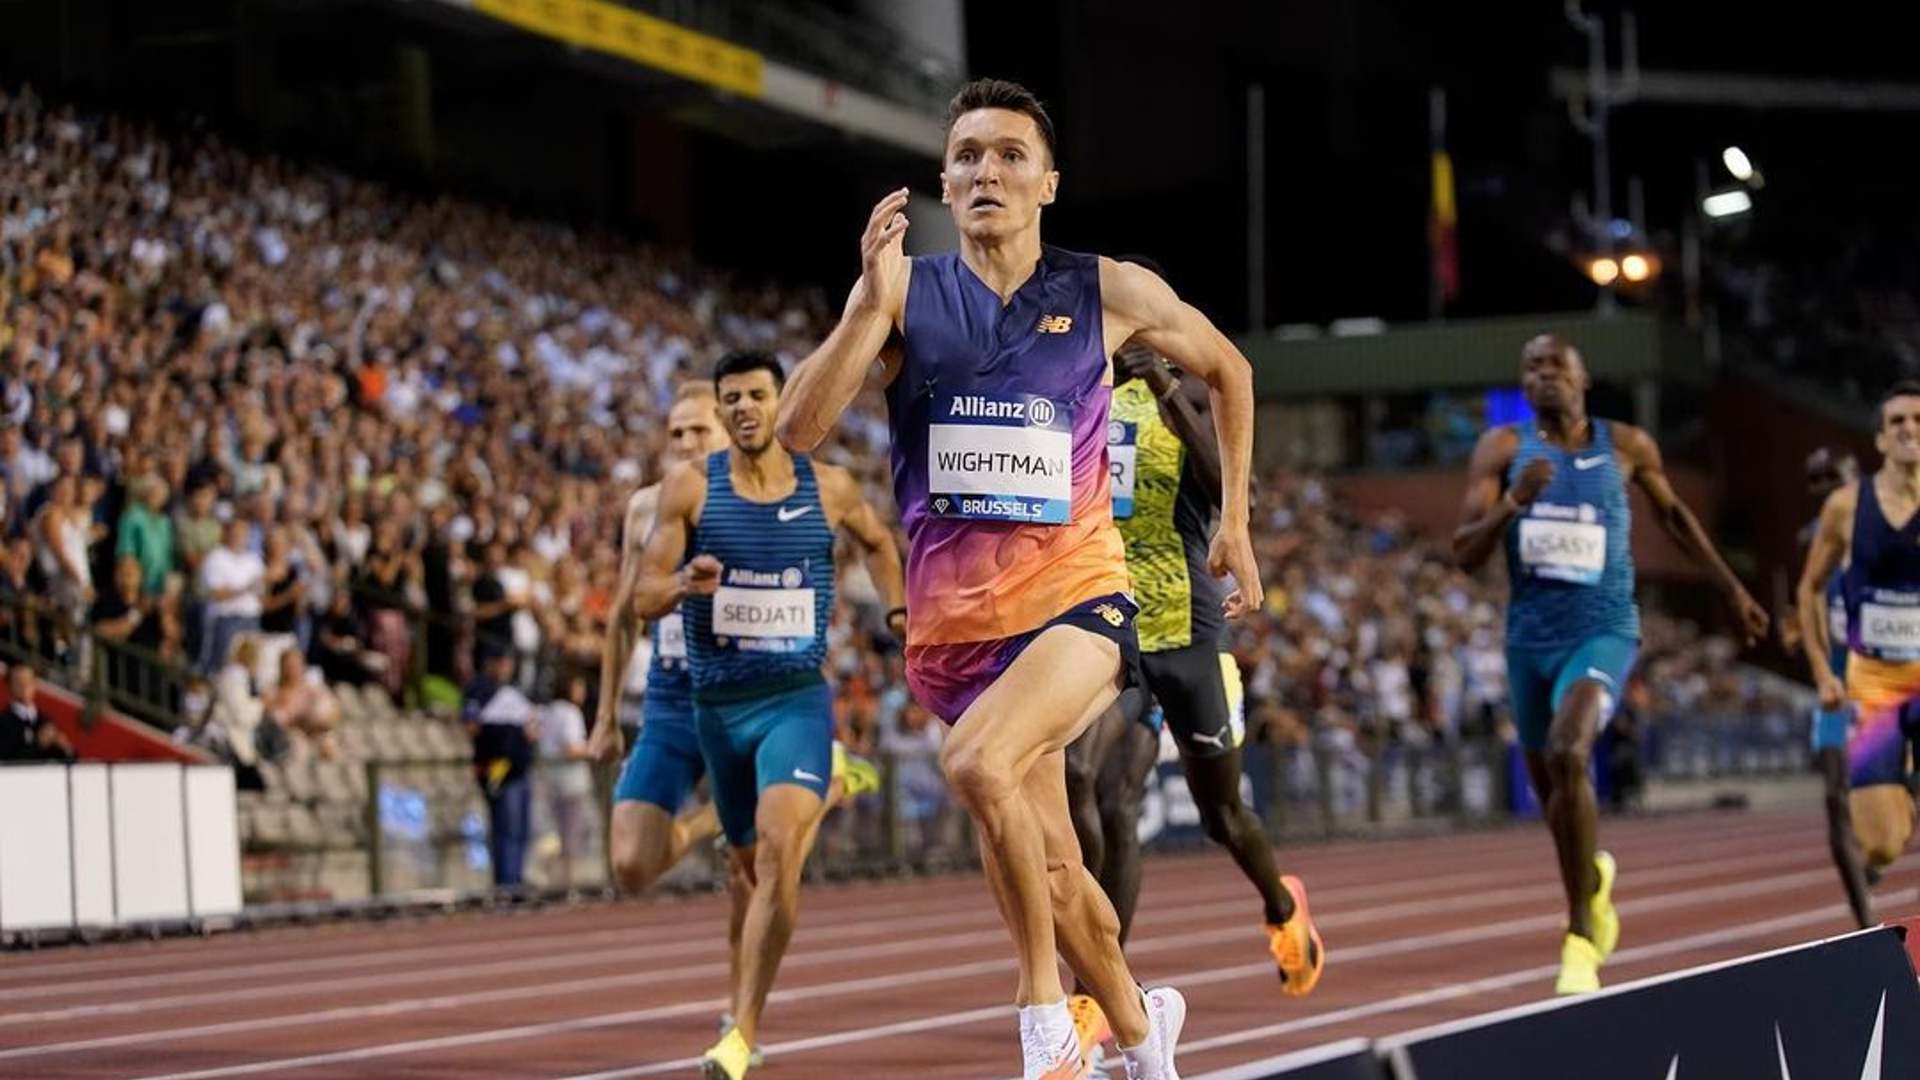 Jake Wightman in action during the Diamond League Brussels leg in 2022 (Image Credits - Instagram/ @jakeswightman)